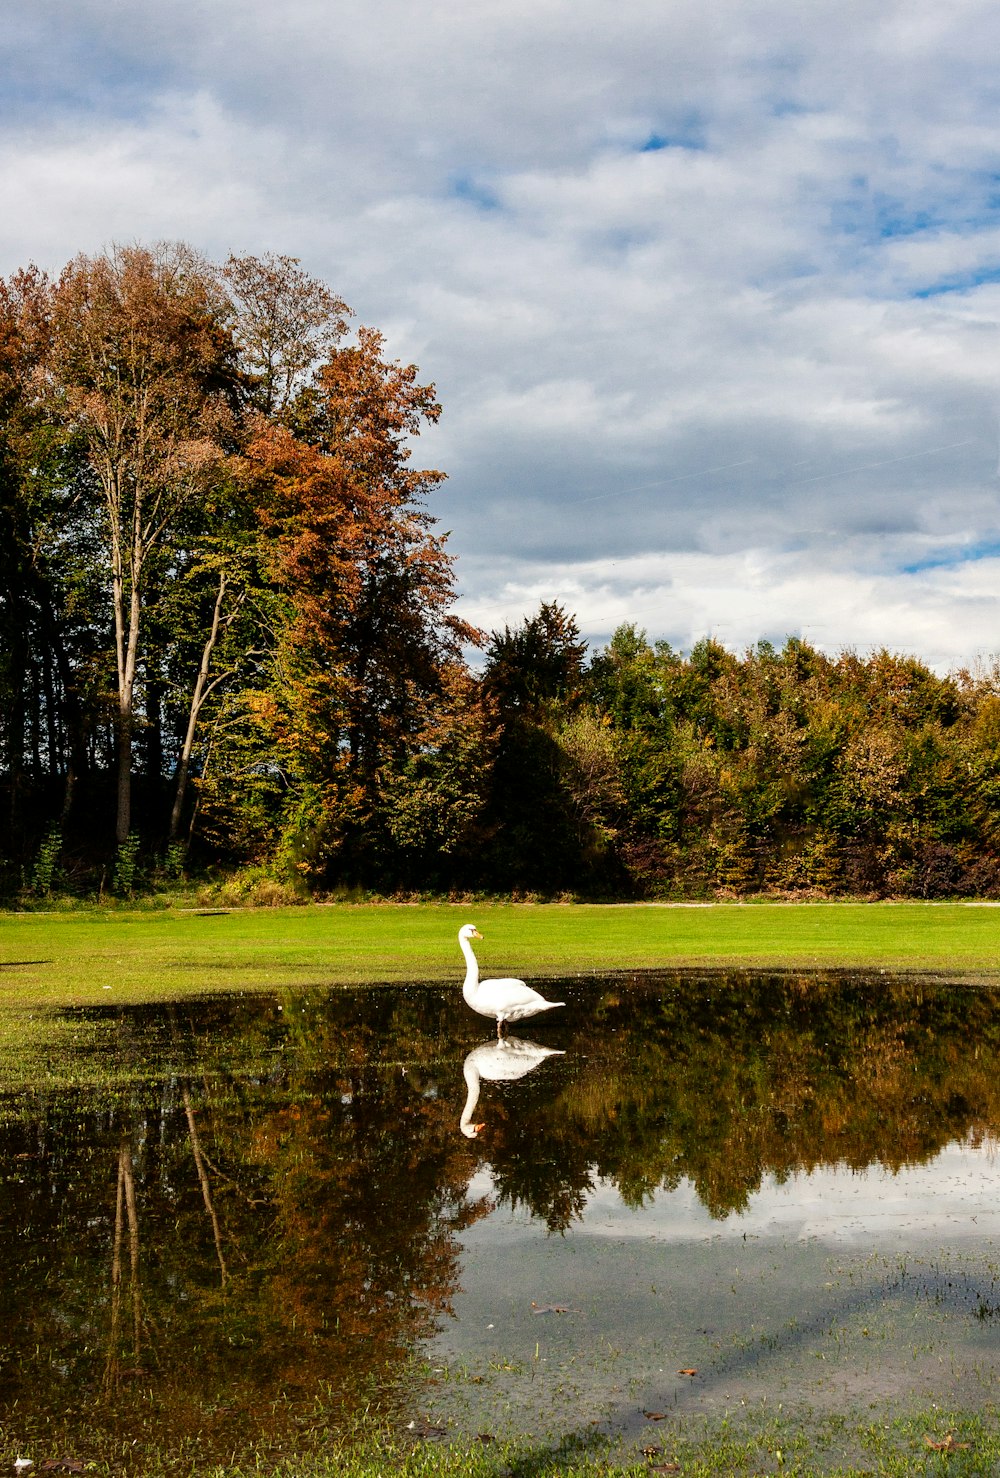 white swan on green grass field near lake under cloudy sky during daytime